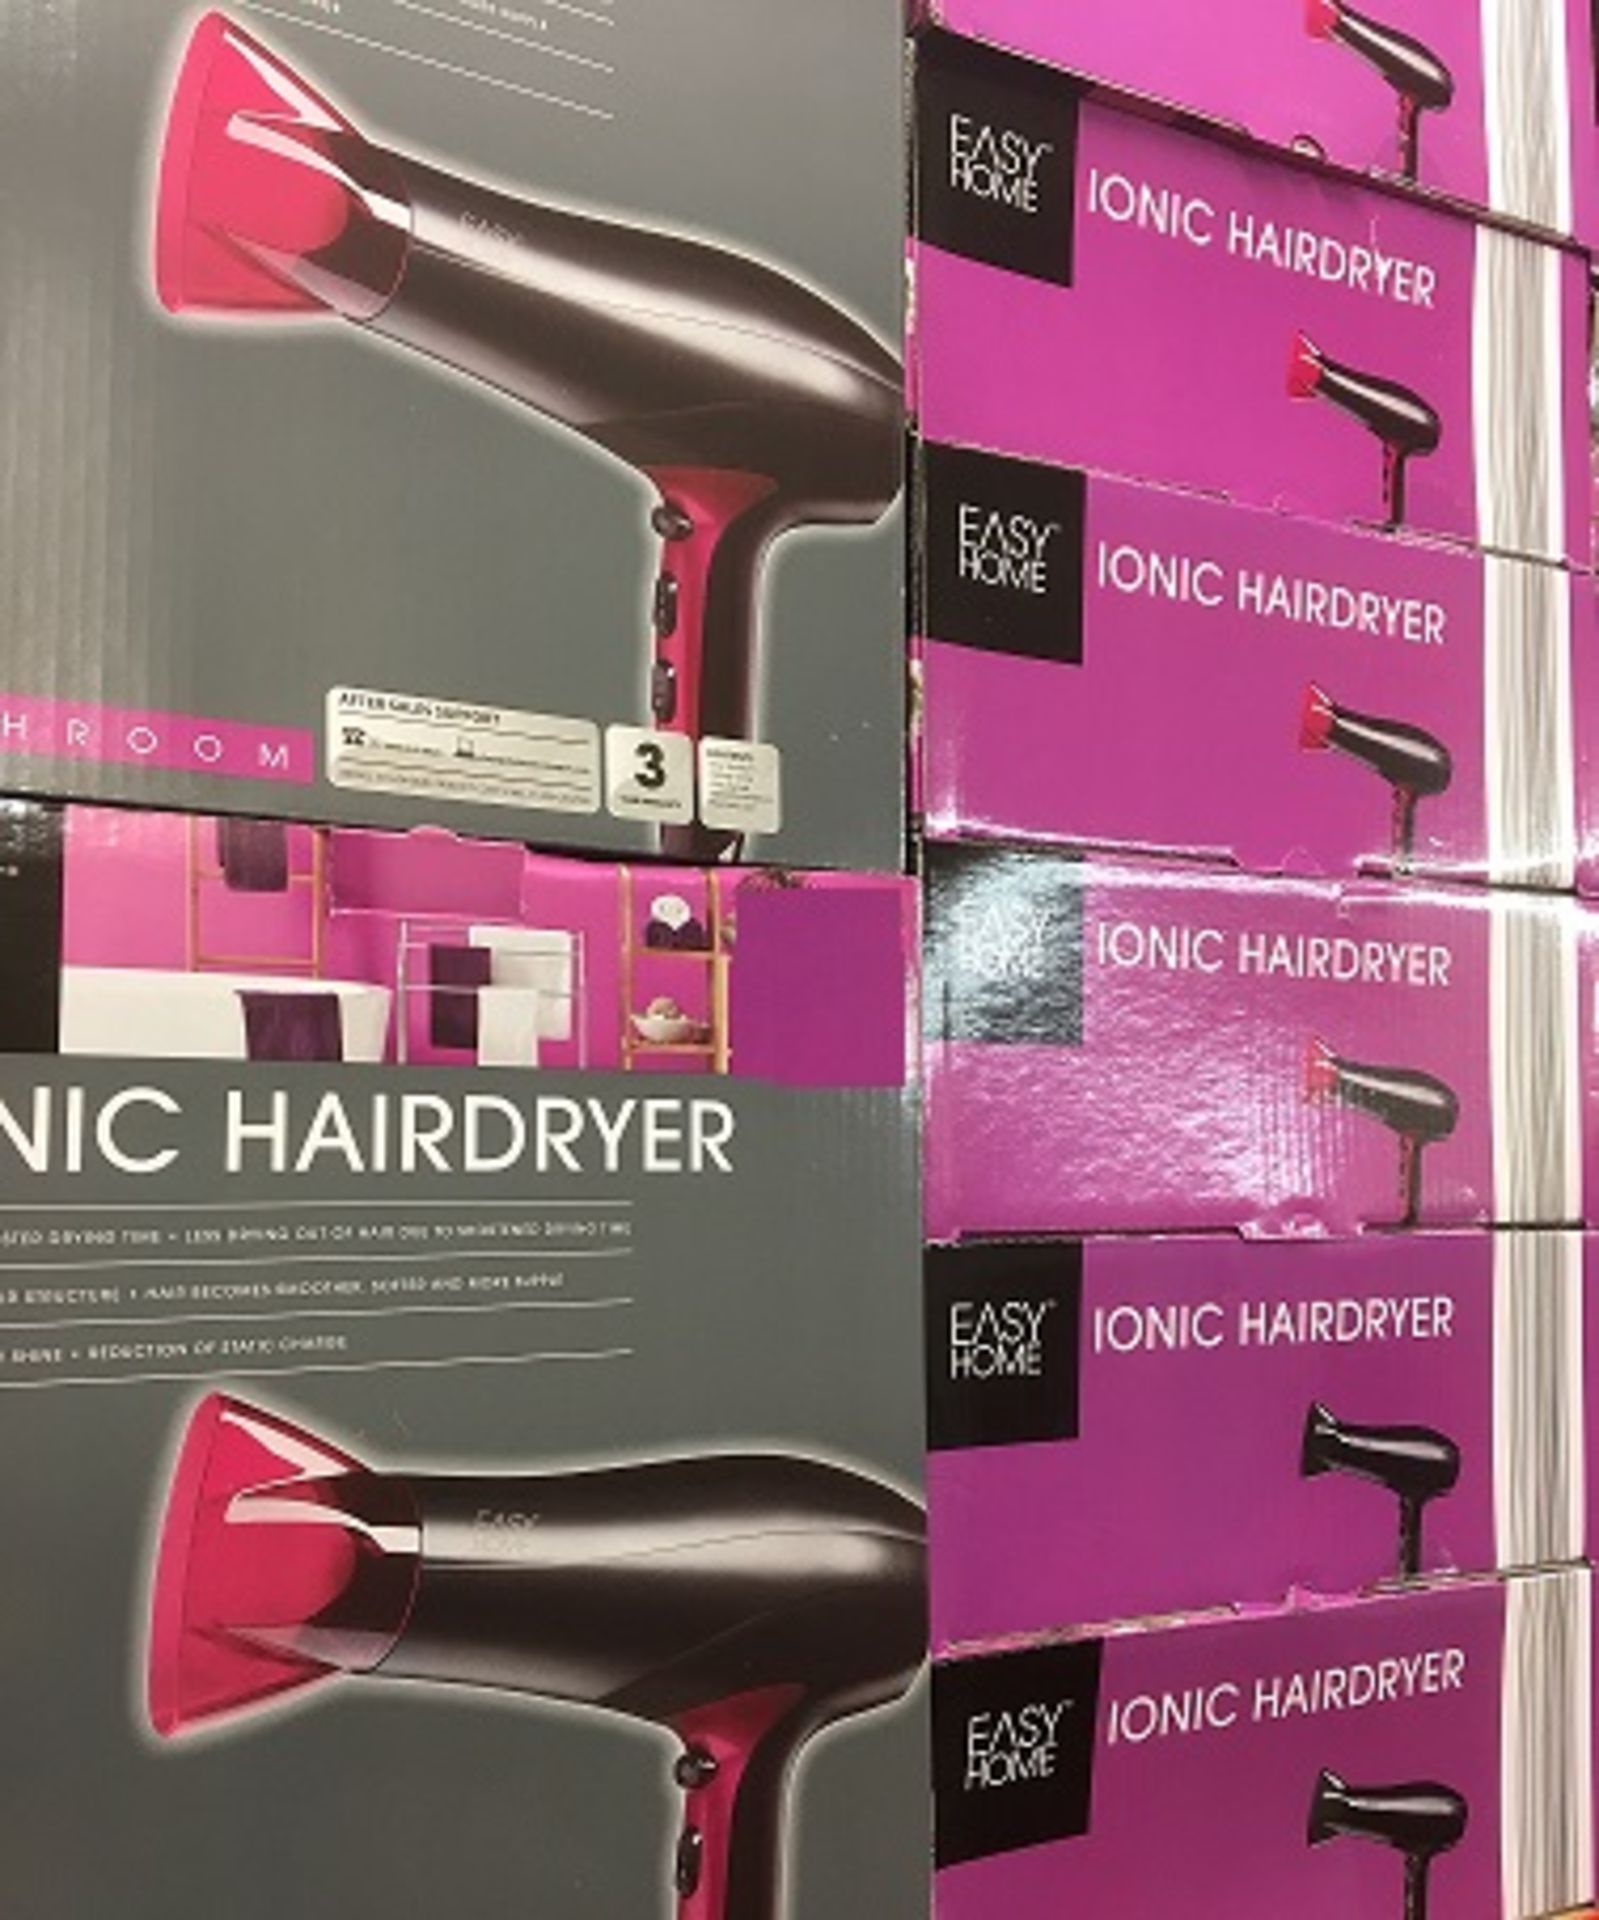 V Brand New Easy Home Ionic Hairdryer-3 Temperature Levels-Directional & Removable Styling Nozzle- - Image 3 of 3